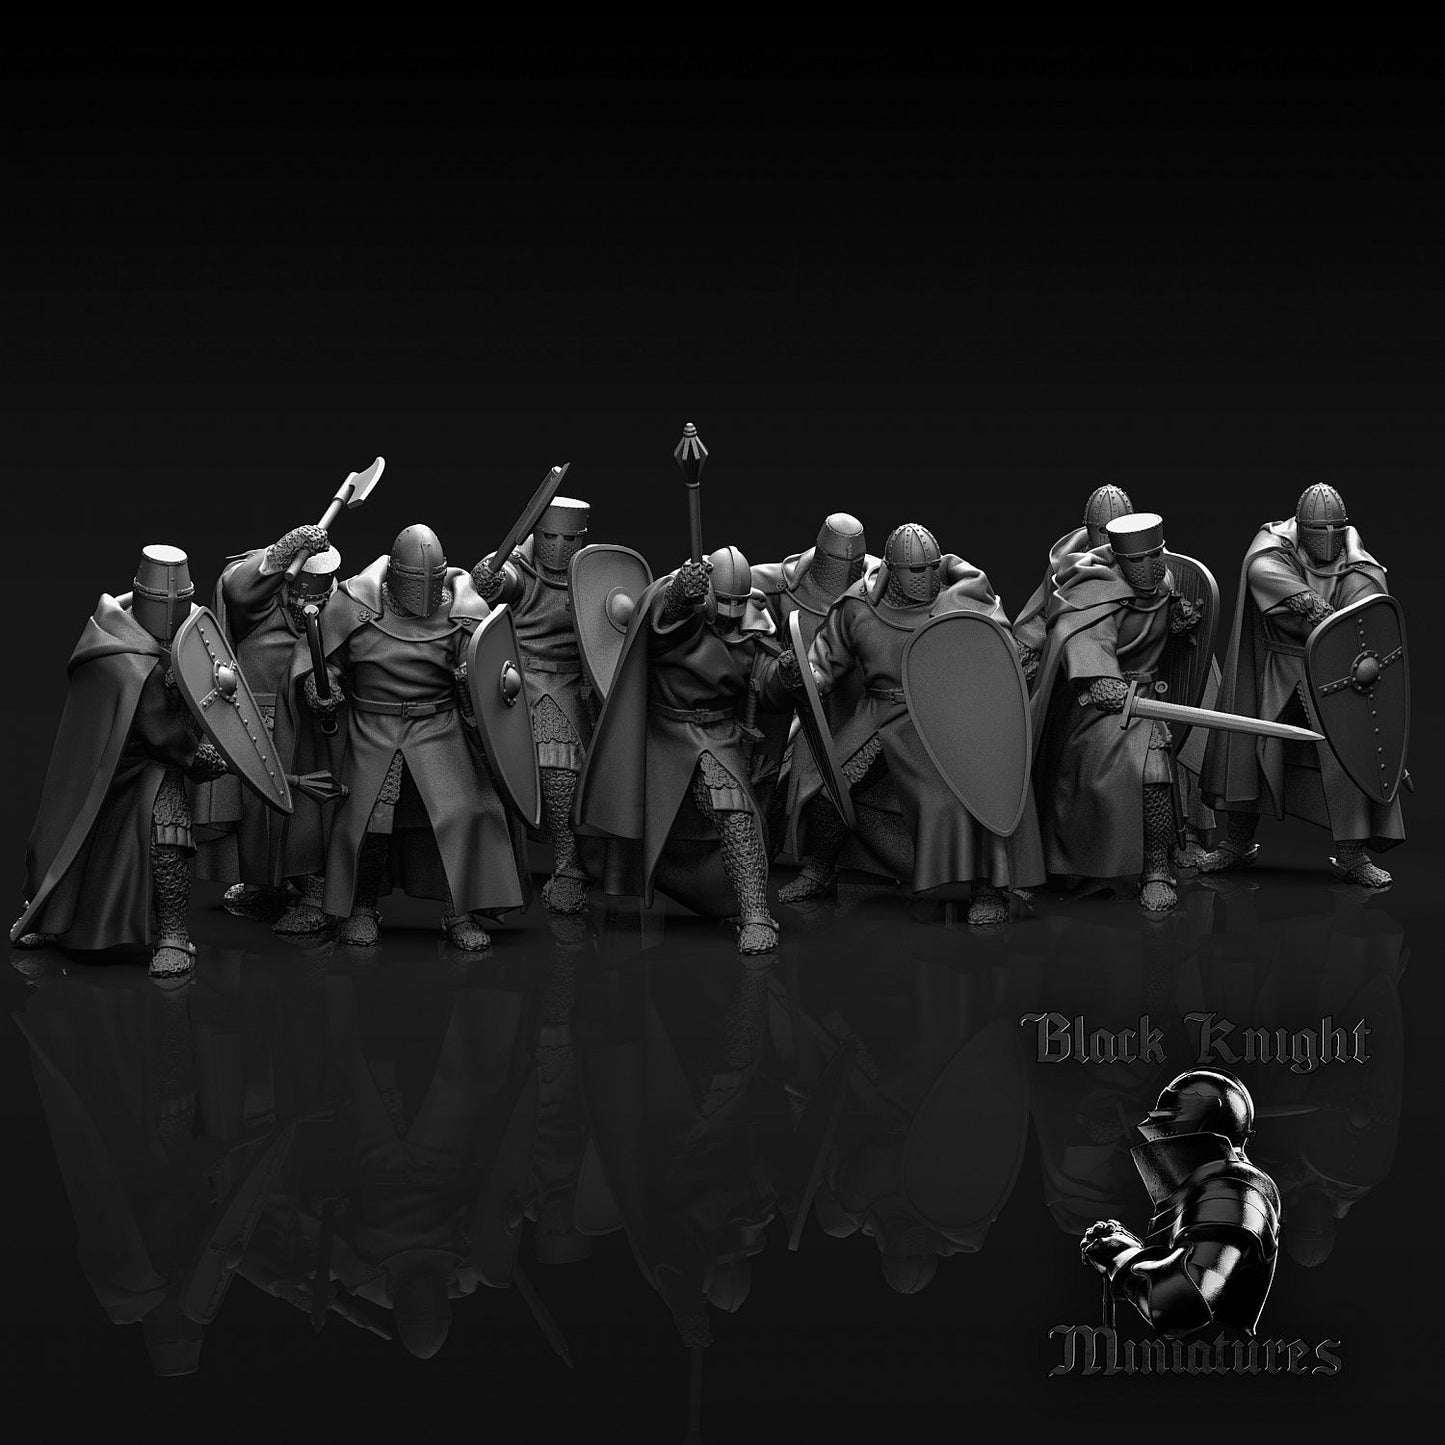 13th century Teutonic Knights on foot by Black Knight Miniatures.